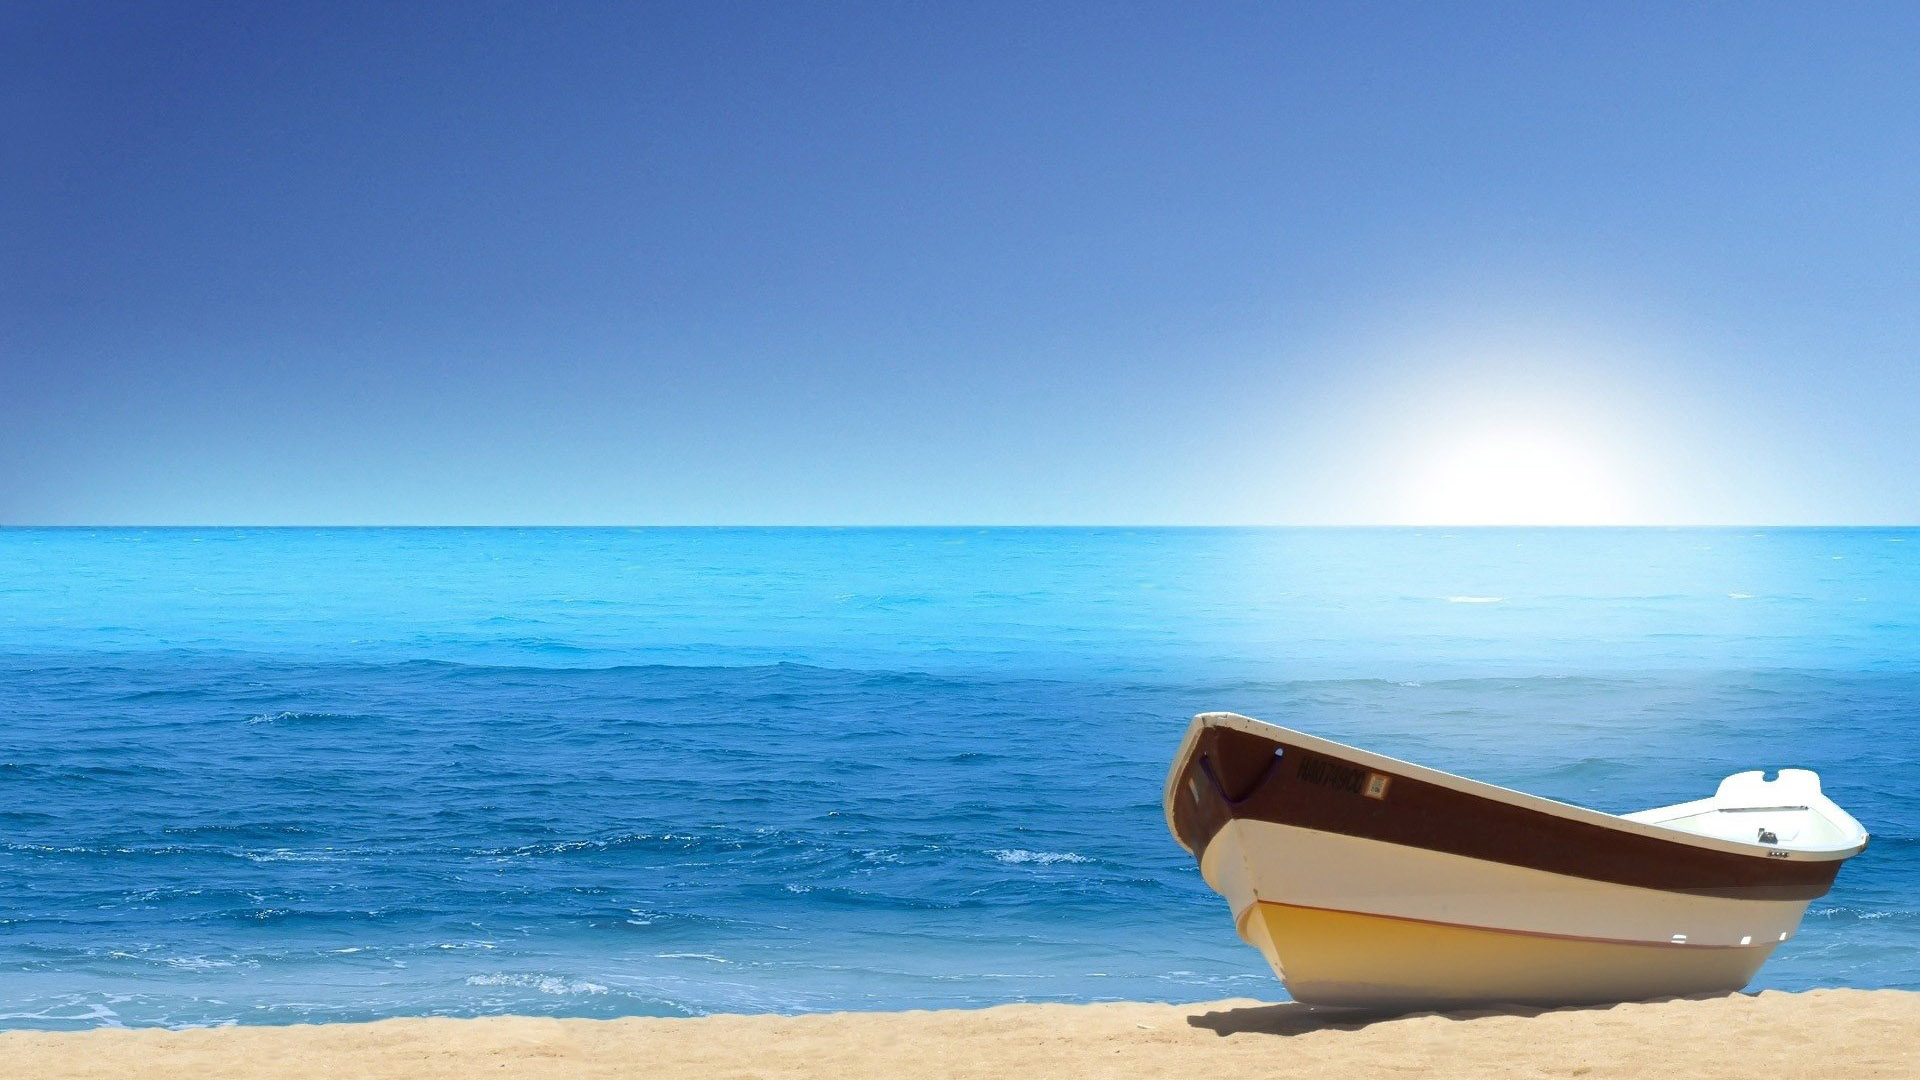 White Brown Boat On Beach Sand With Calm Body Of Water 2K Beach